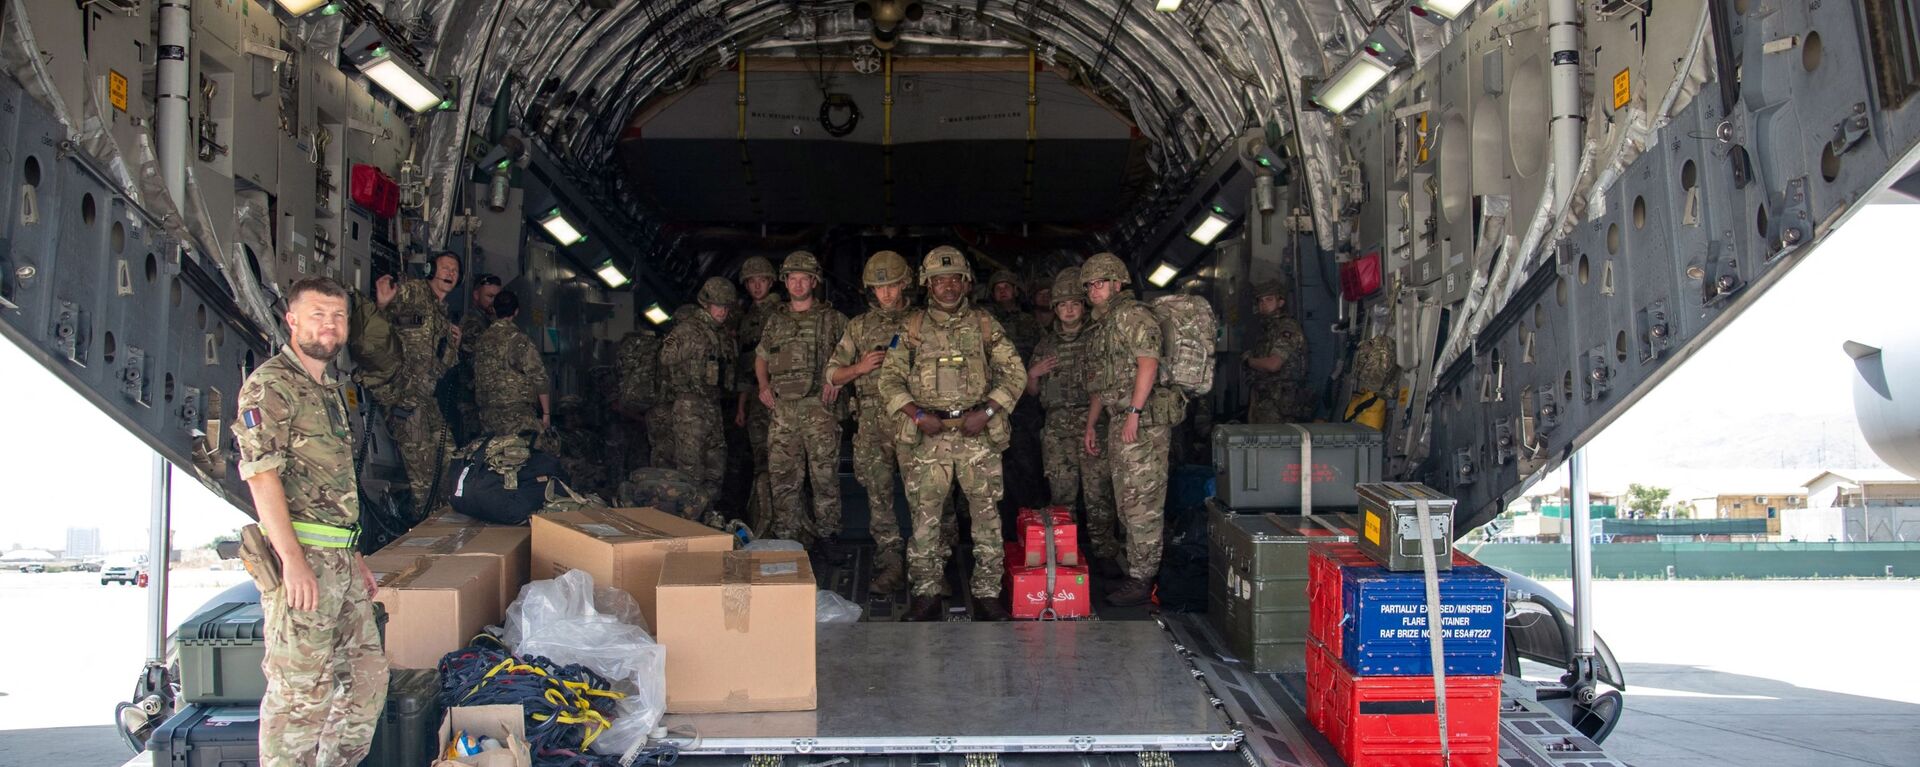 A handout picture taken and released by the British Ministry of Defence (MOD) on August 15, 2021 shows members of the British Army, from 16 Air Assault Brigade, as they disembark from an RAF Voyager aircraft after landing in Kabul, Afghanistan, to assist in evacuating British nationals and entitled persons as part of Operation PITTING - Sputnik International, 1920, 18.08.2021